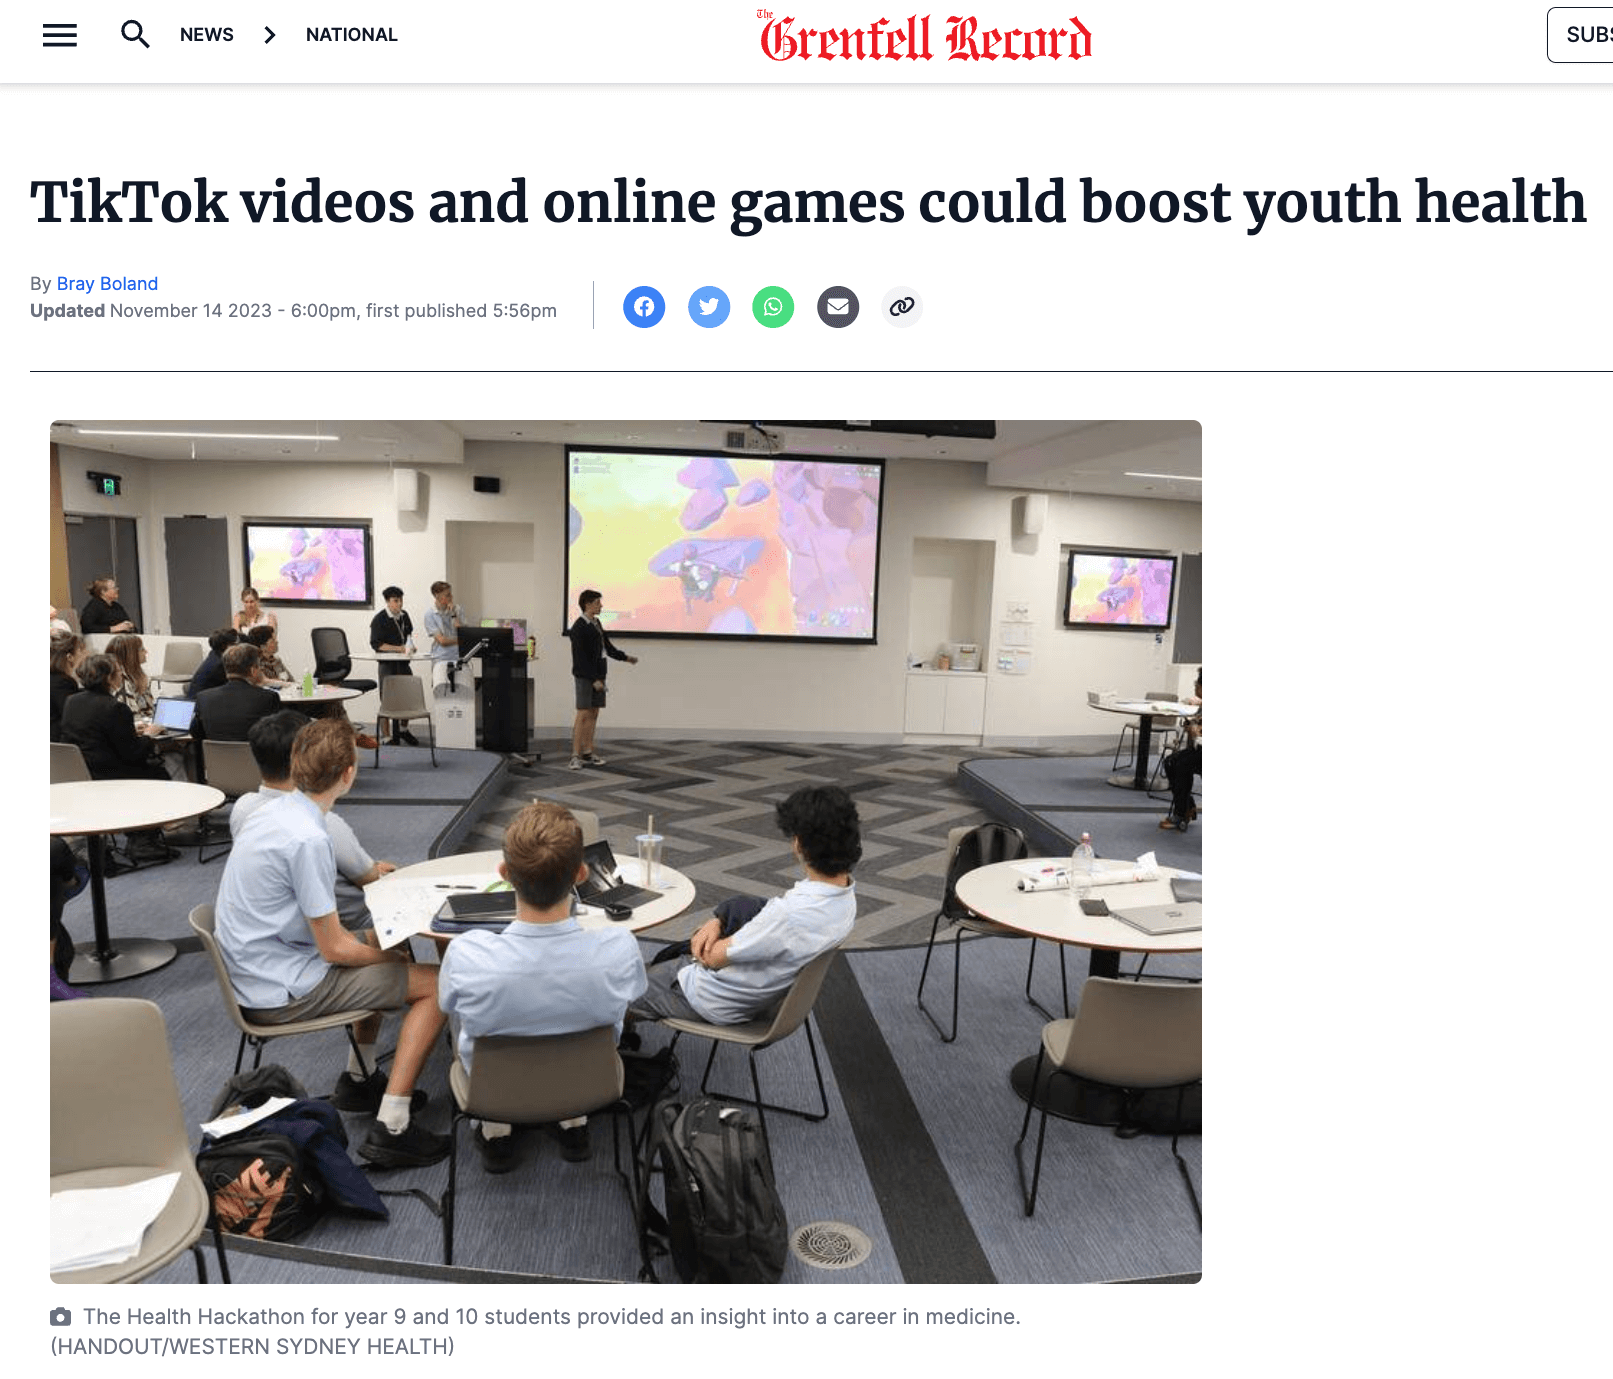 TikTok videos and games could boost youth health